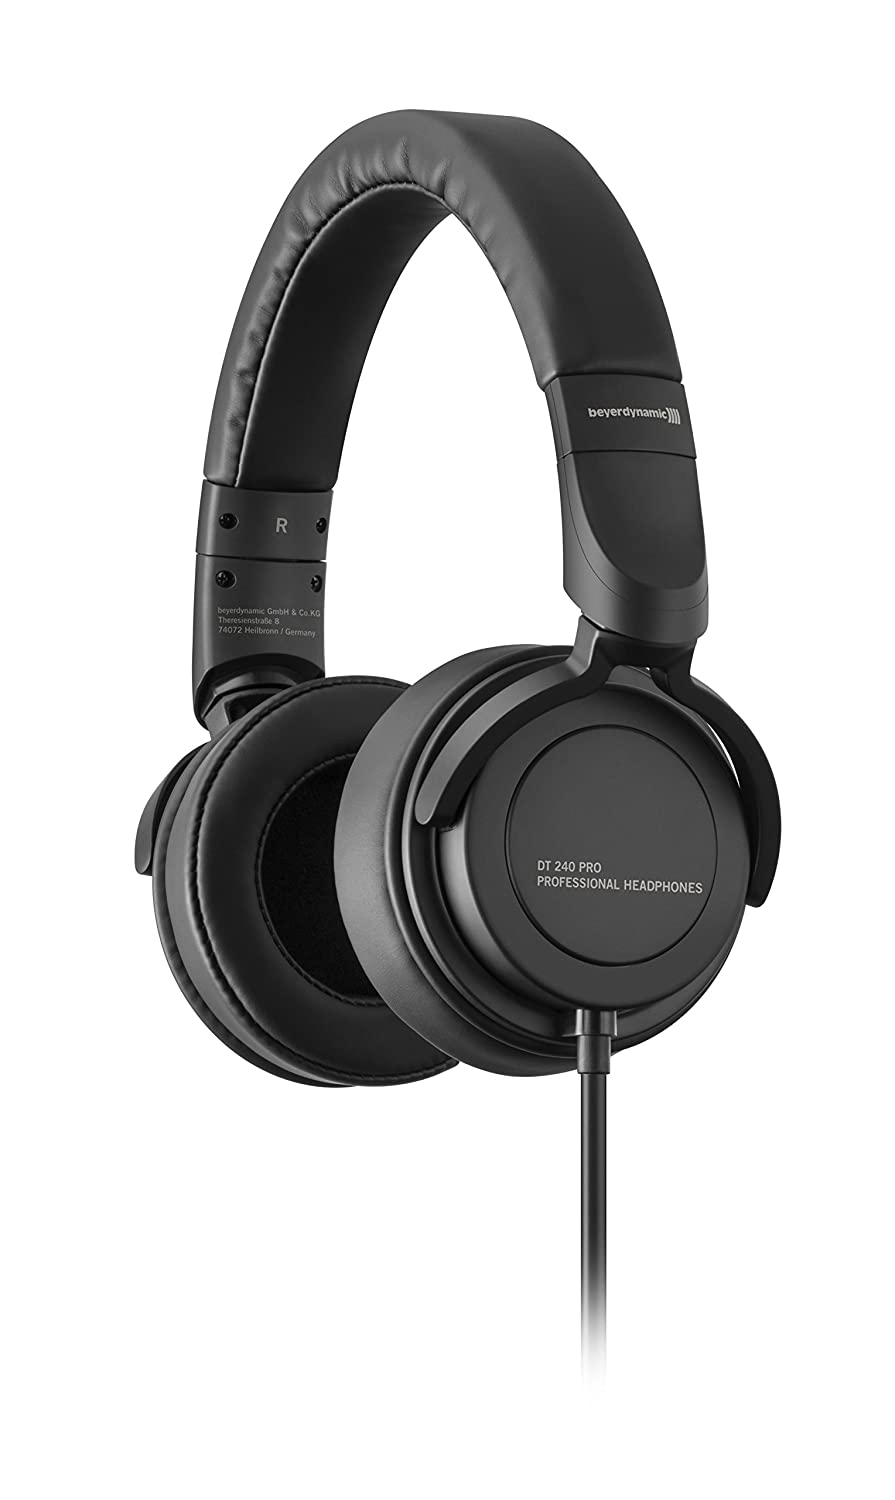 beyerdynamic DT 240 Pro Wired Over Ear Headphones with Mic